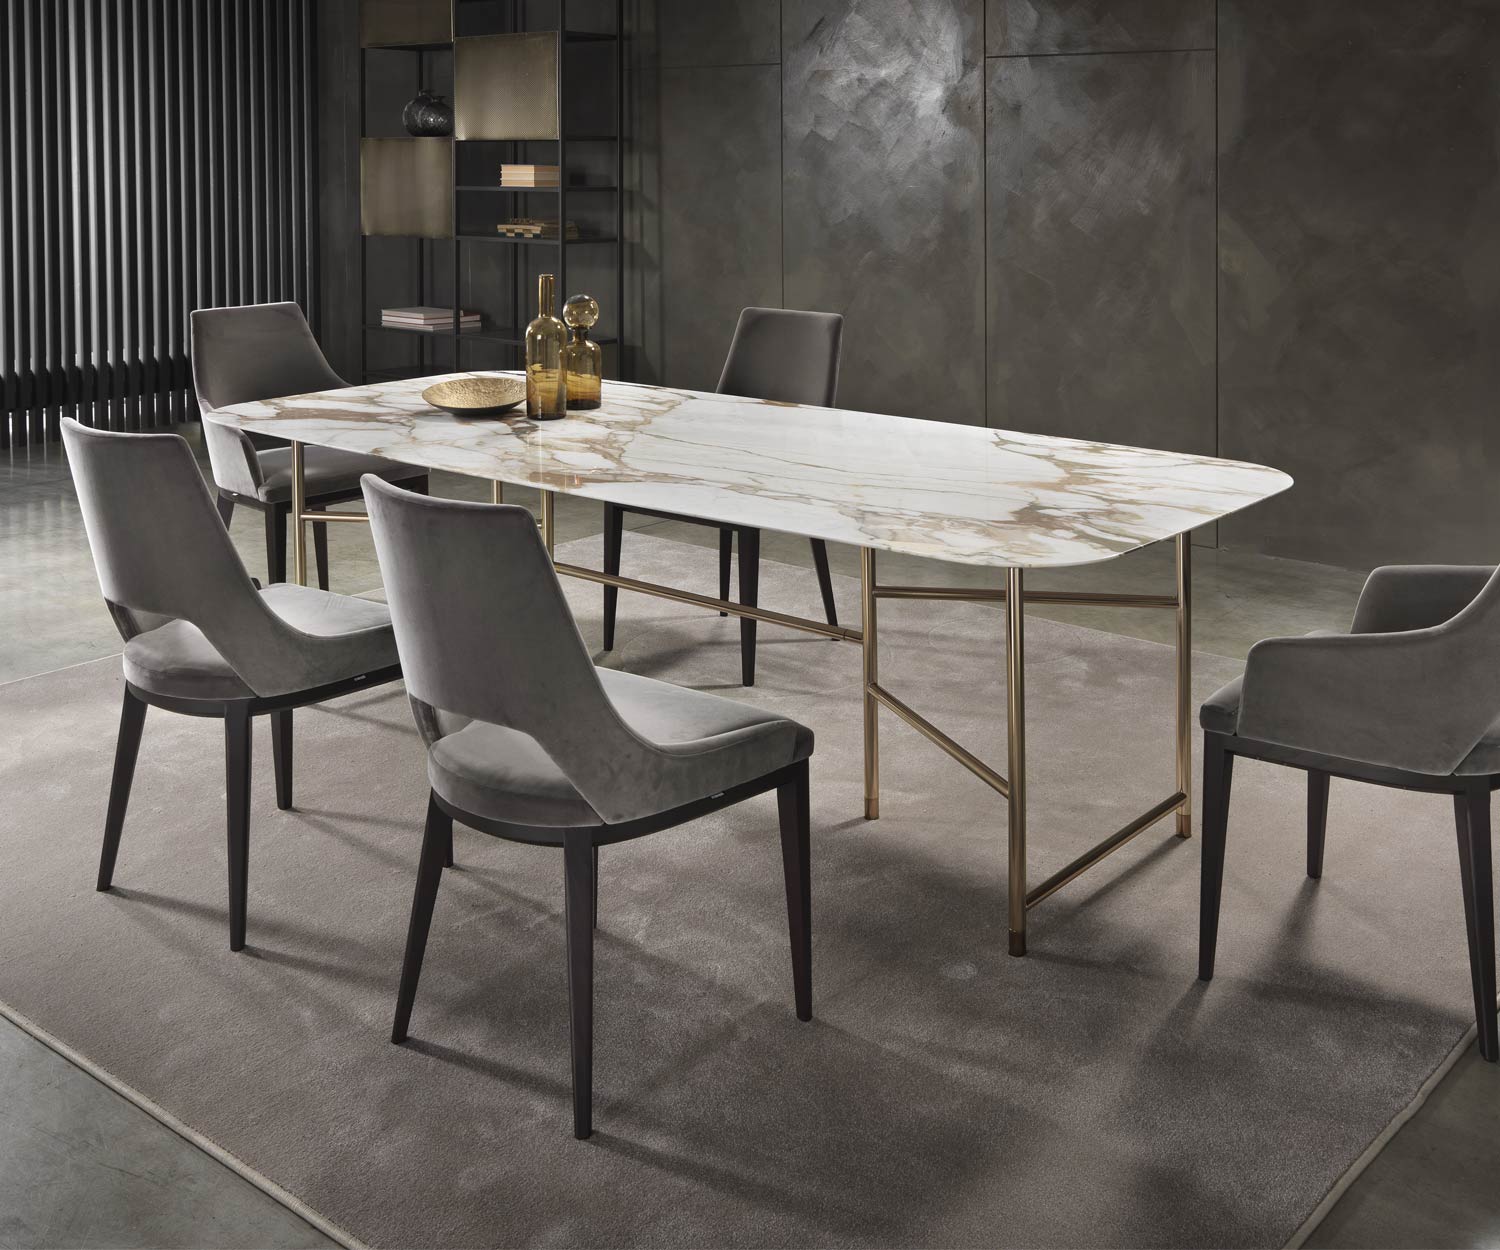 Elegant Marelli Kyoto design dining table Calacatta marble table top Panorama view